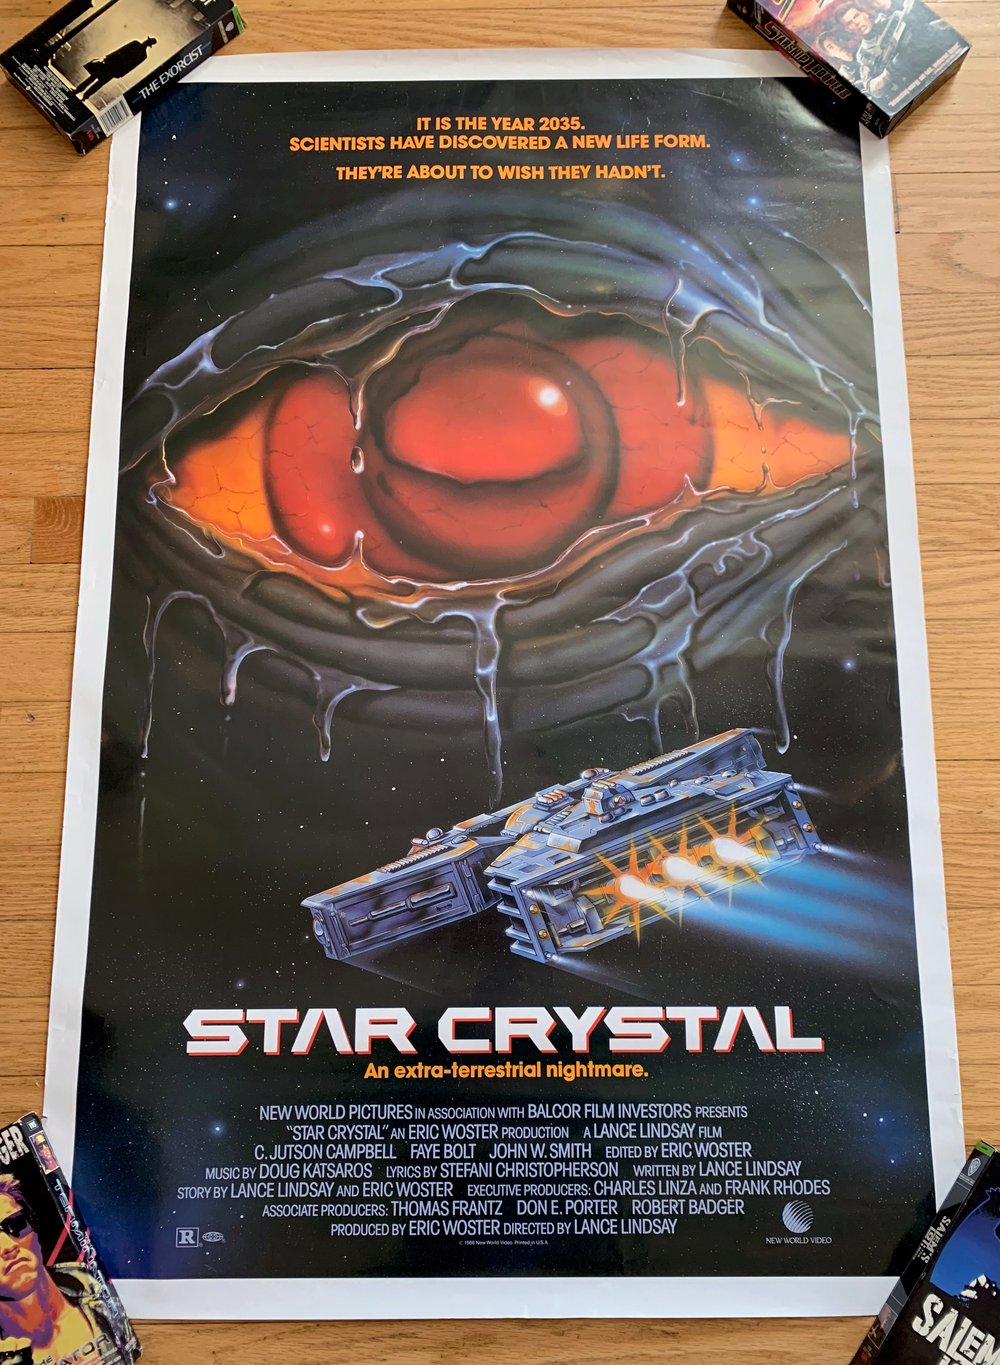 1986 STAR CRYSTAL Original New World Video Promotional One Sheet Movie Poster